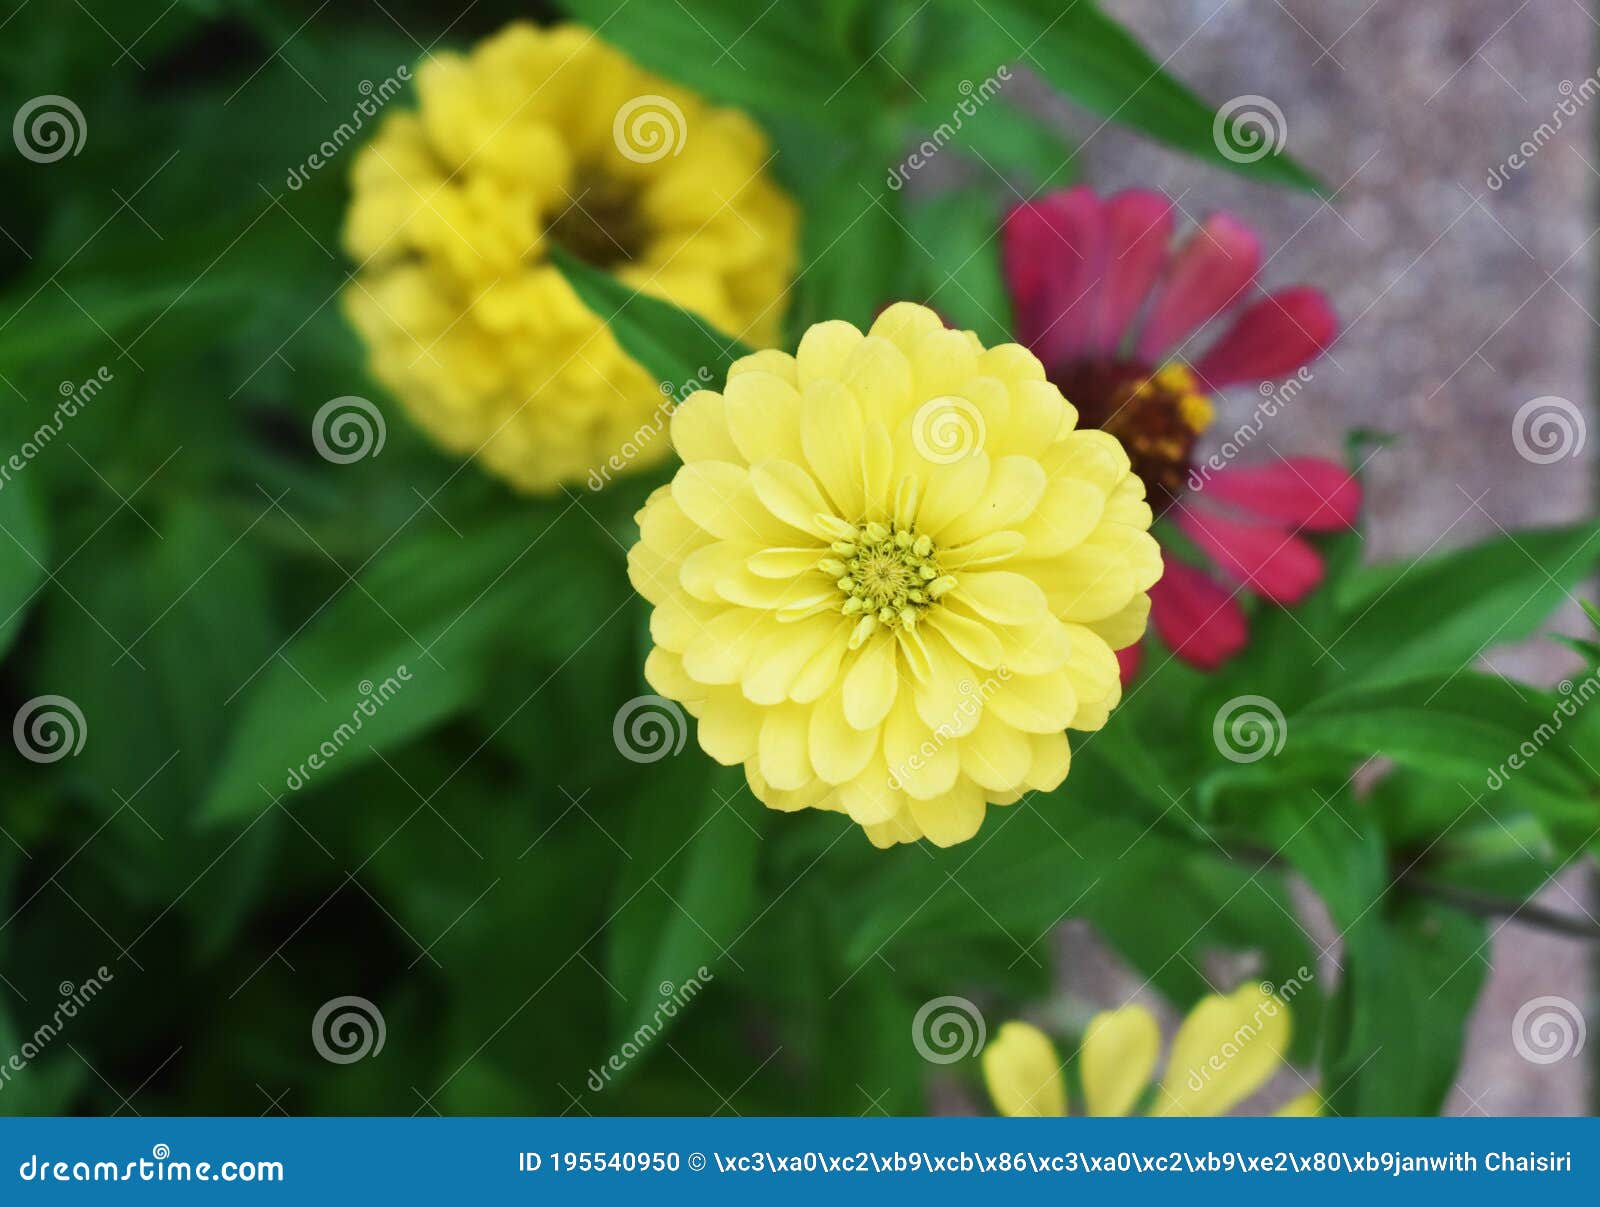 Zinnia Flower On Blurred Green Background Perfect For Presentations Stock Photo Image Of Asteraceae Perennial 195540950